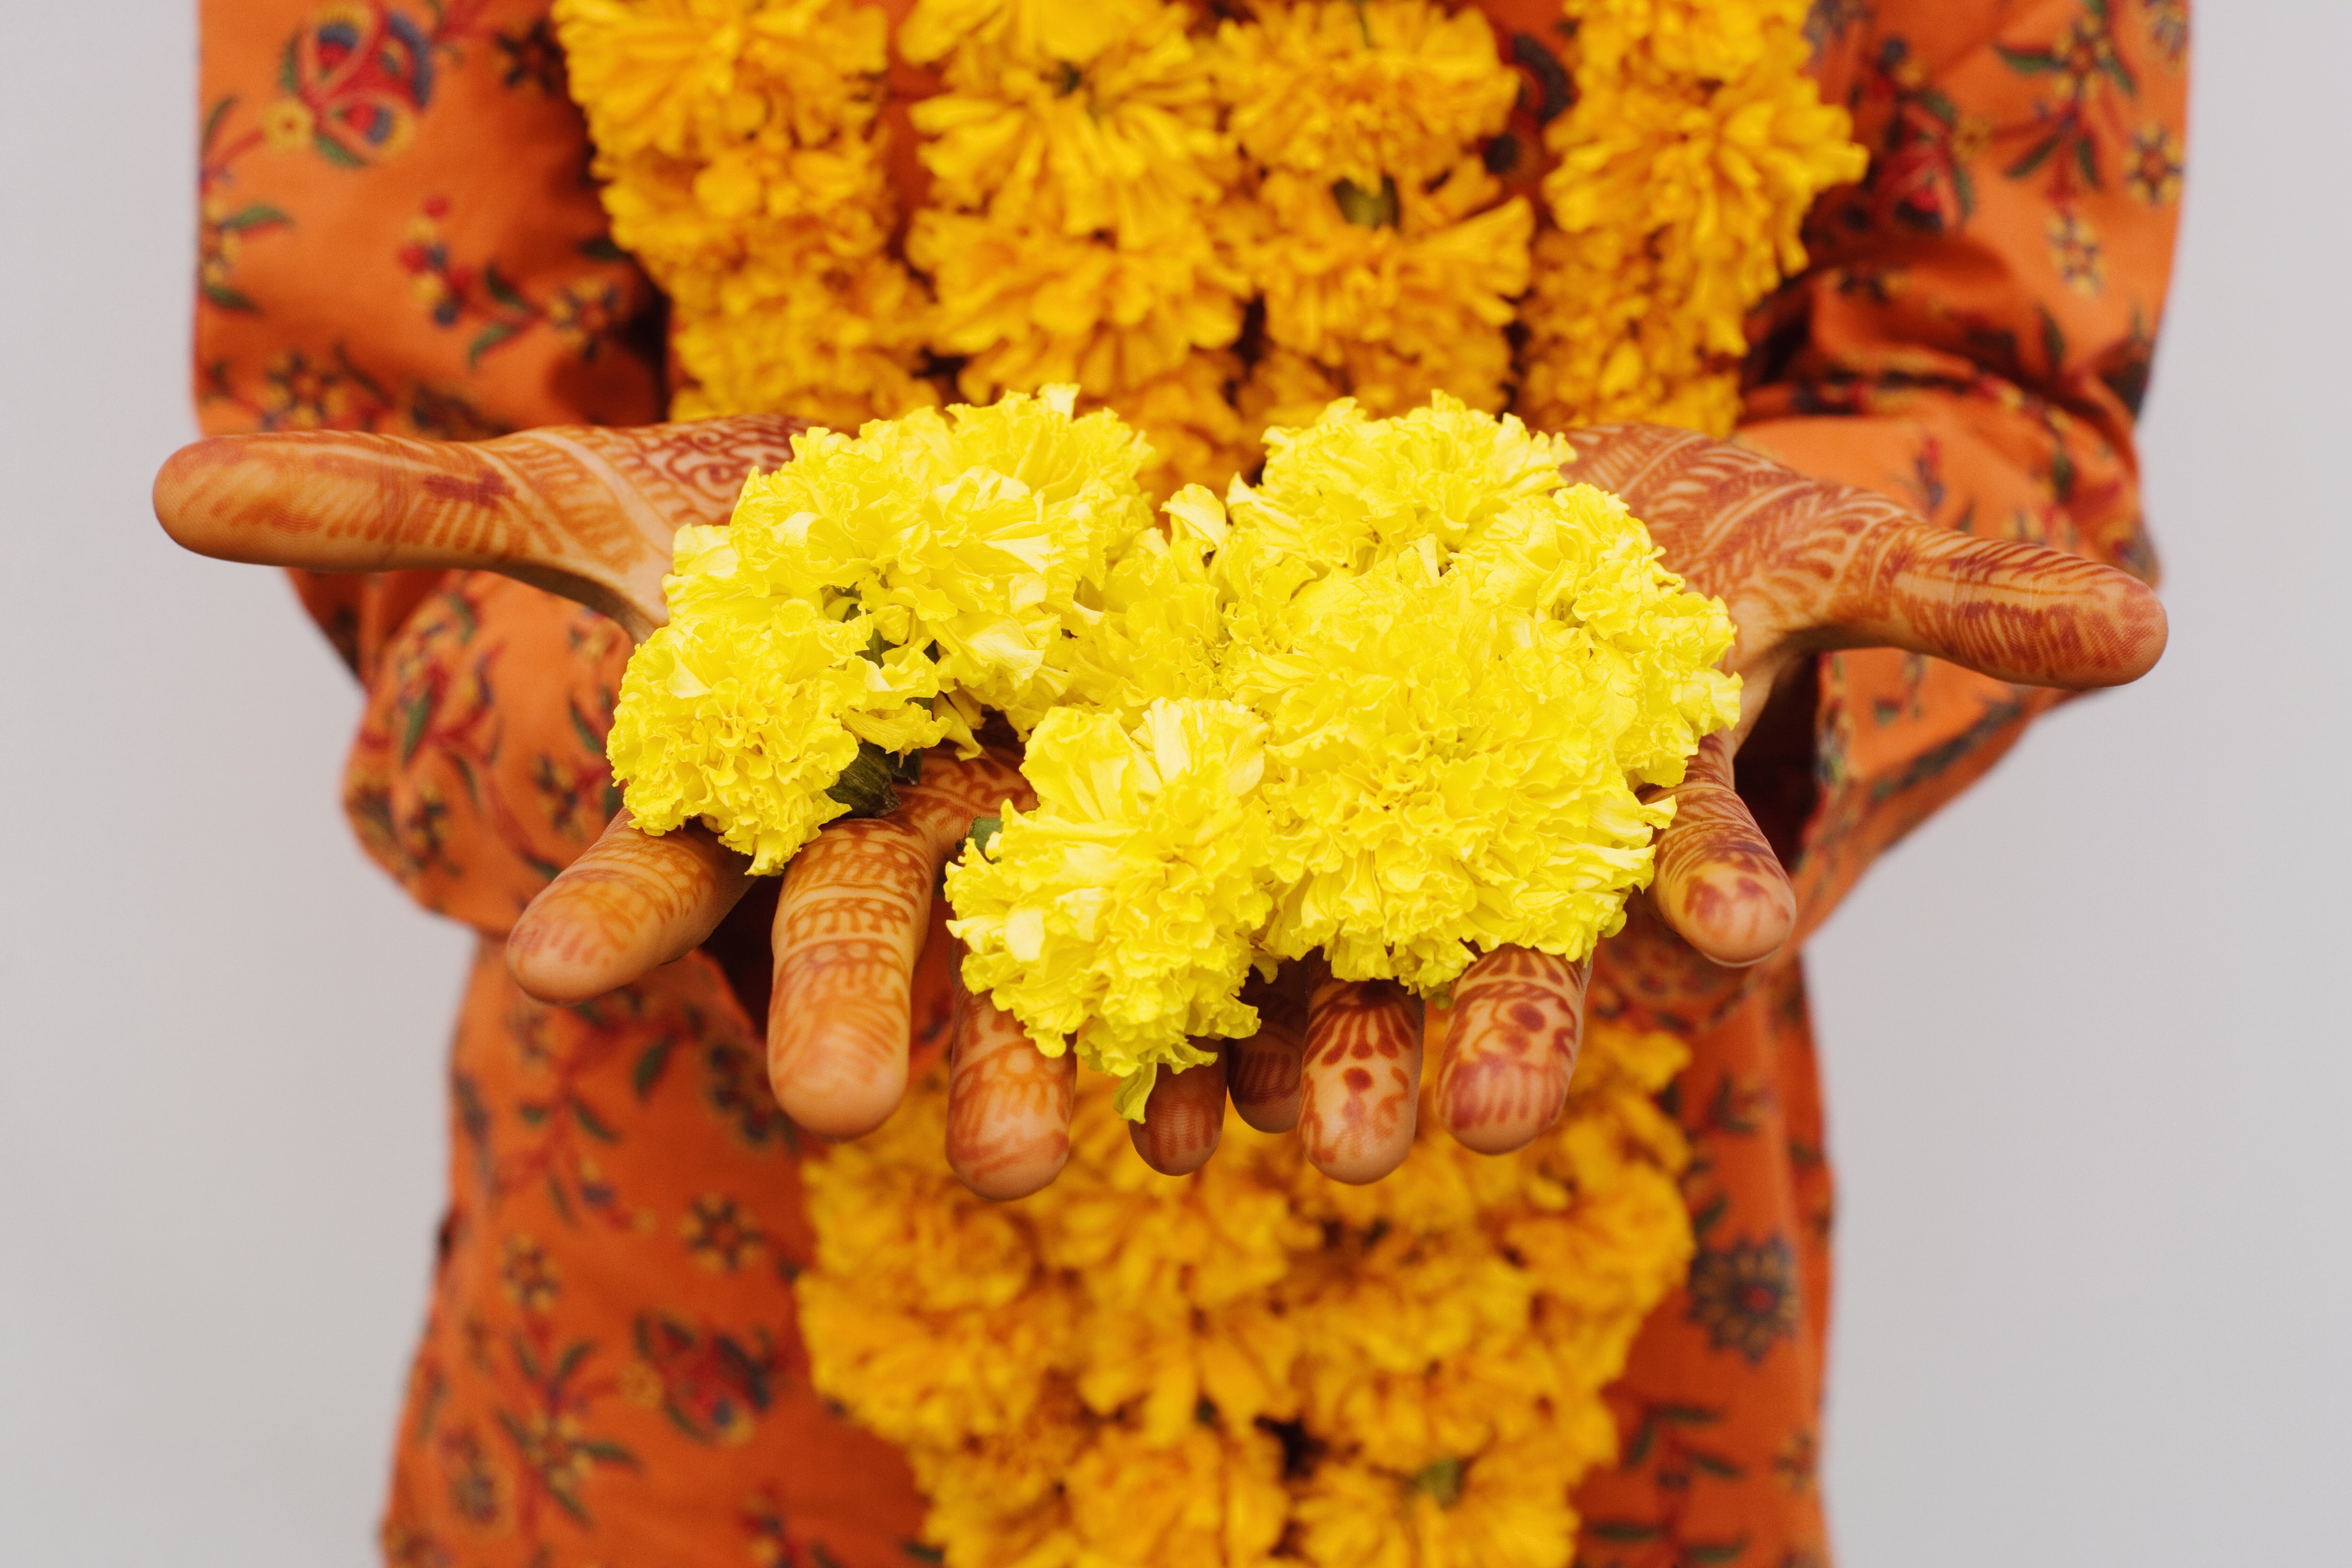 Woman holding marigolds. | Source: Getty Images